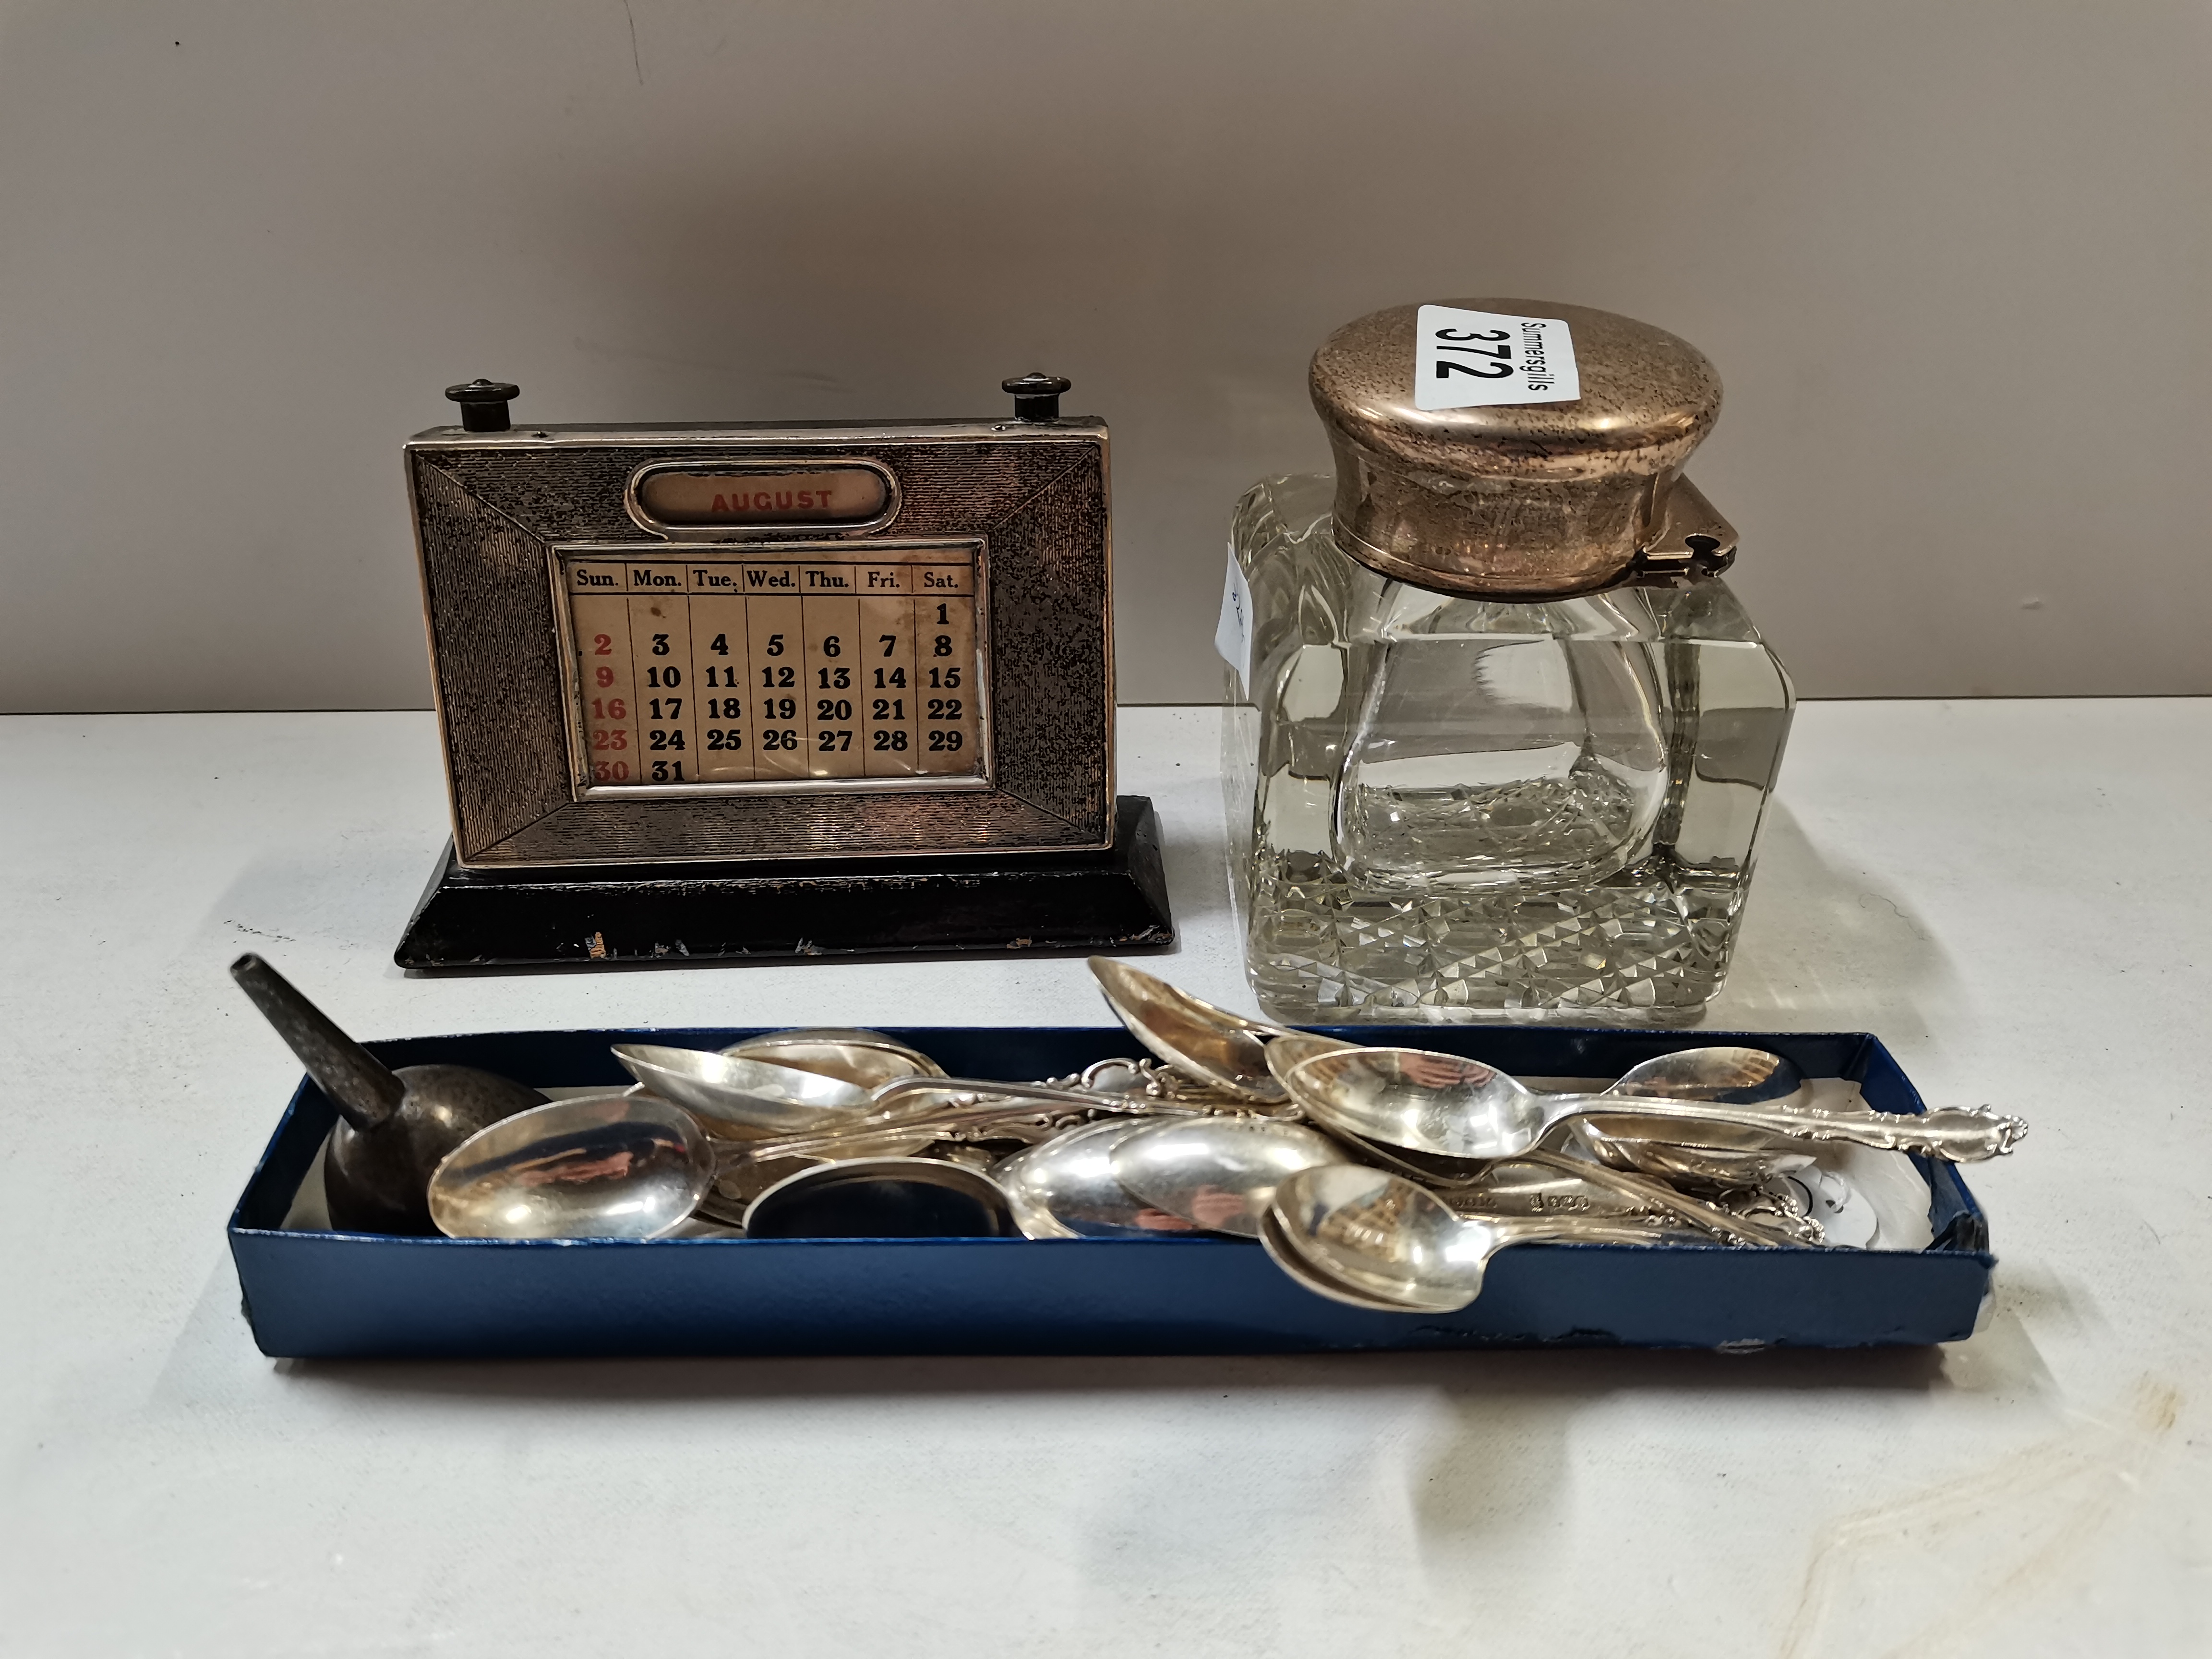 Cut glass and silver ink well, Silver calendar, mixed box of siler teaspoons